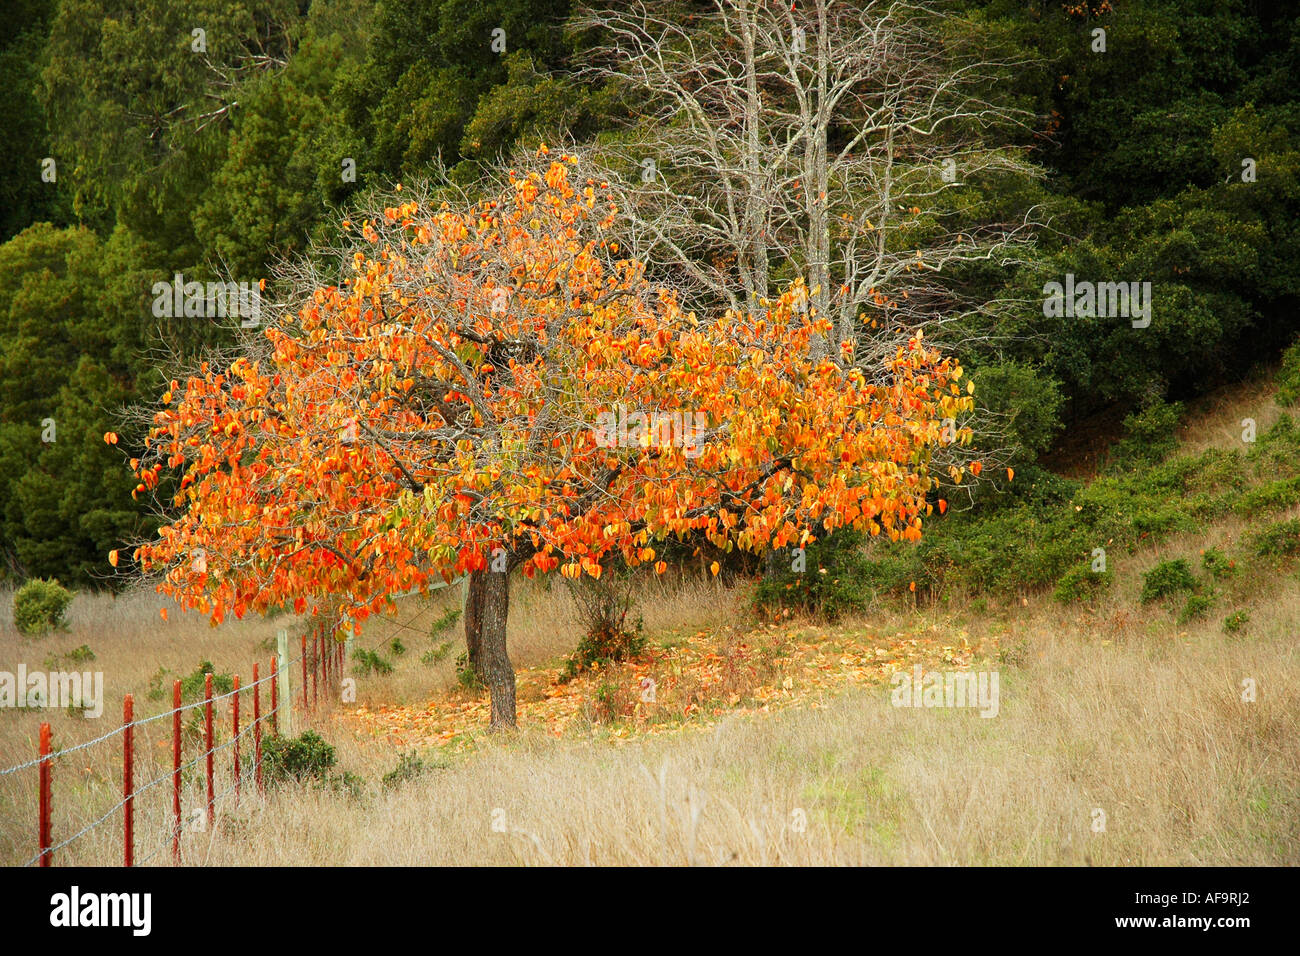 Small tree bearing brilliantly colored leaves in the autumn, in a meadow before a green hill Stock Photo